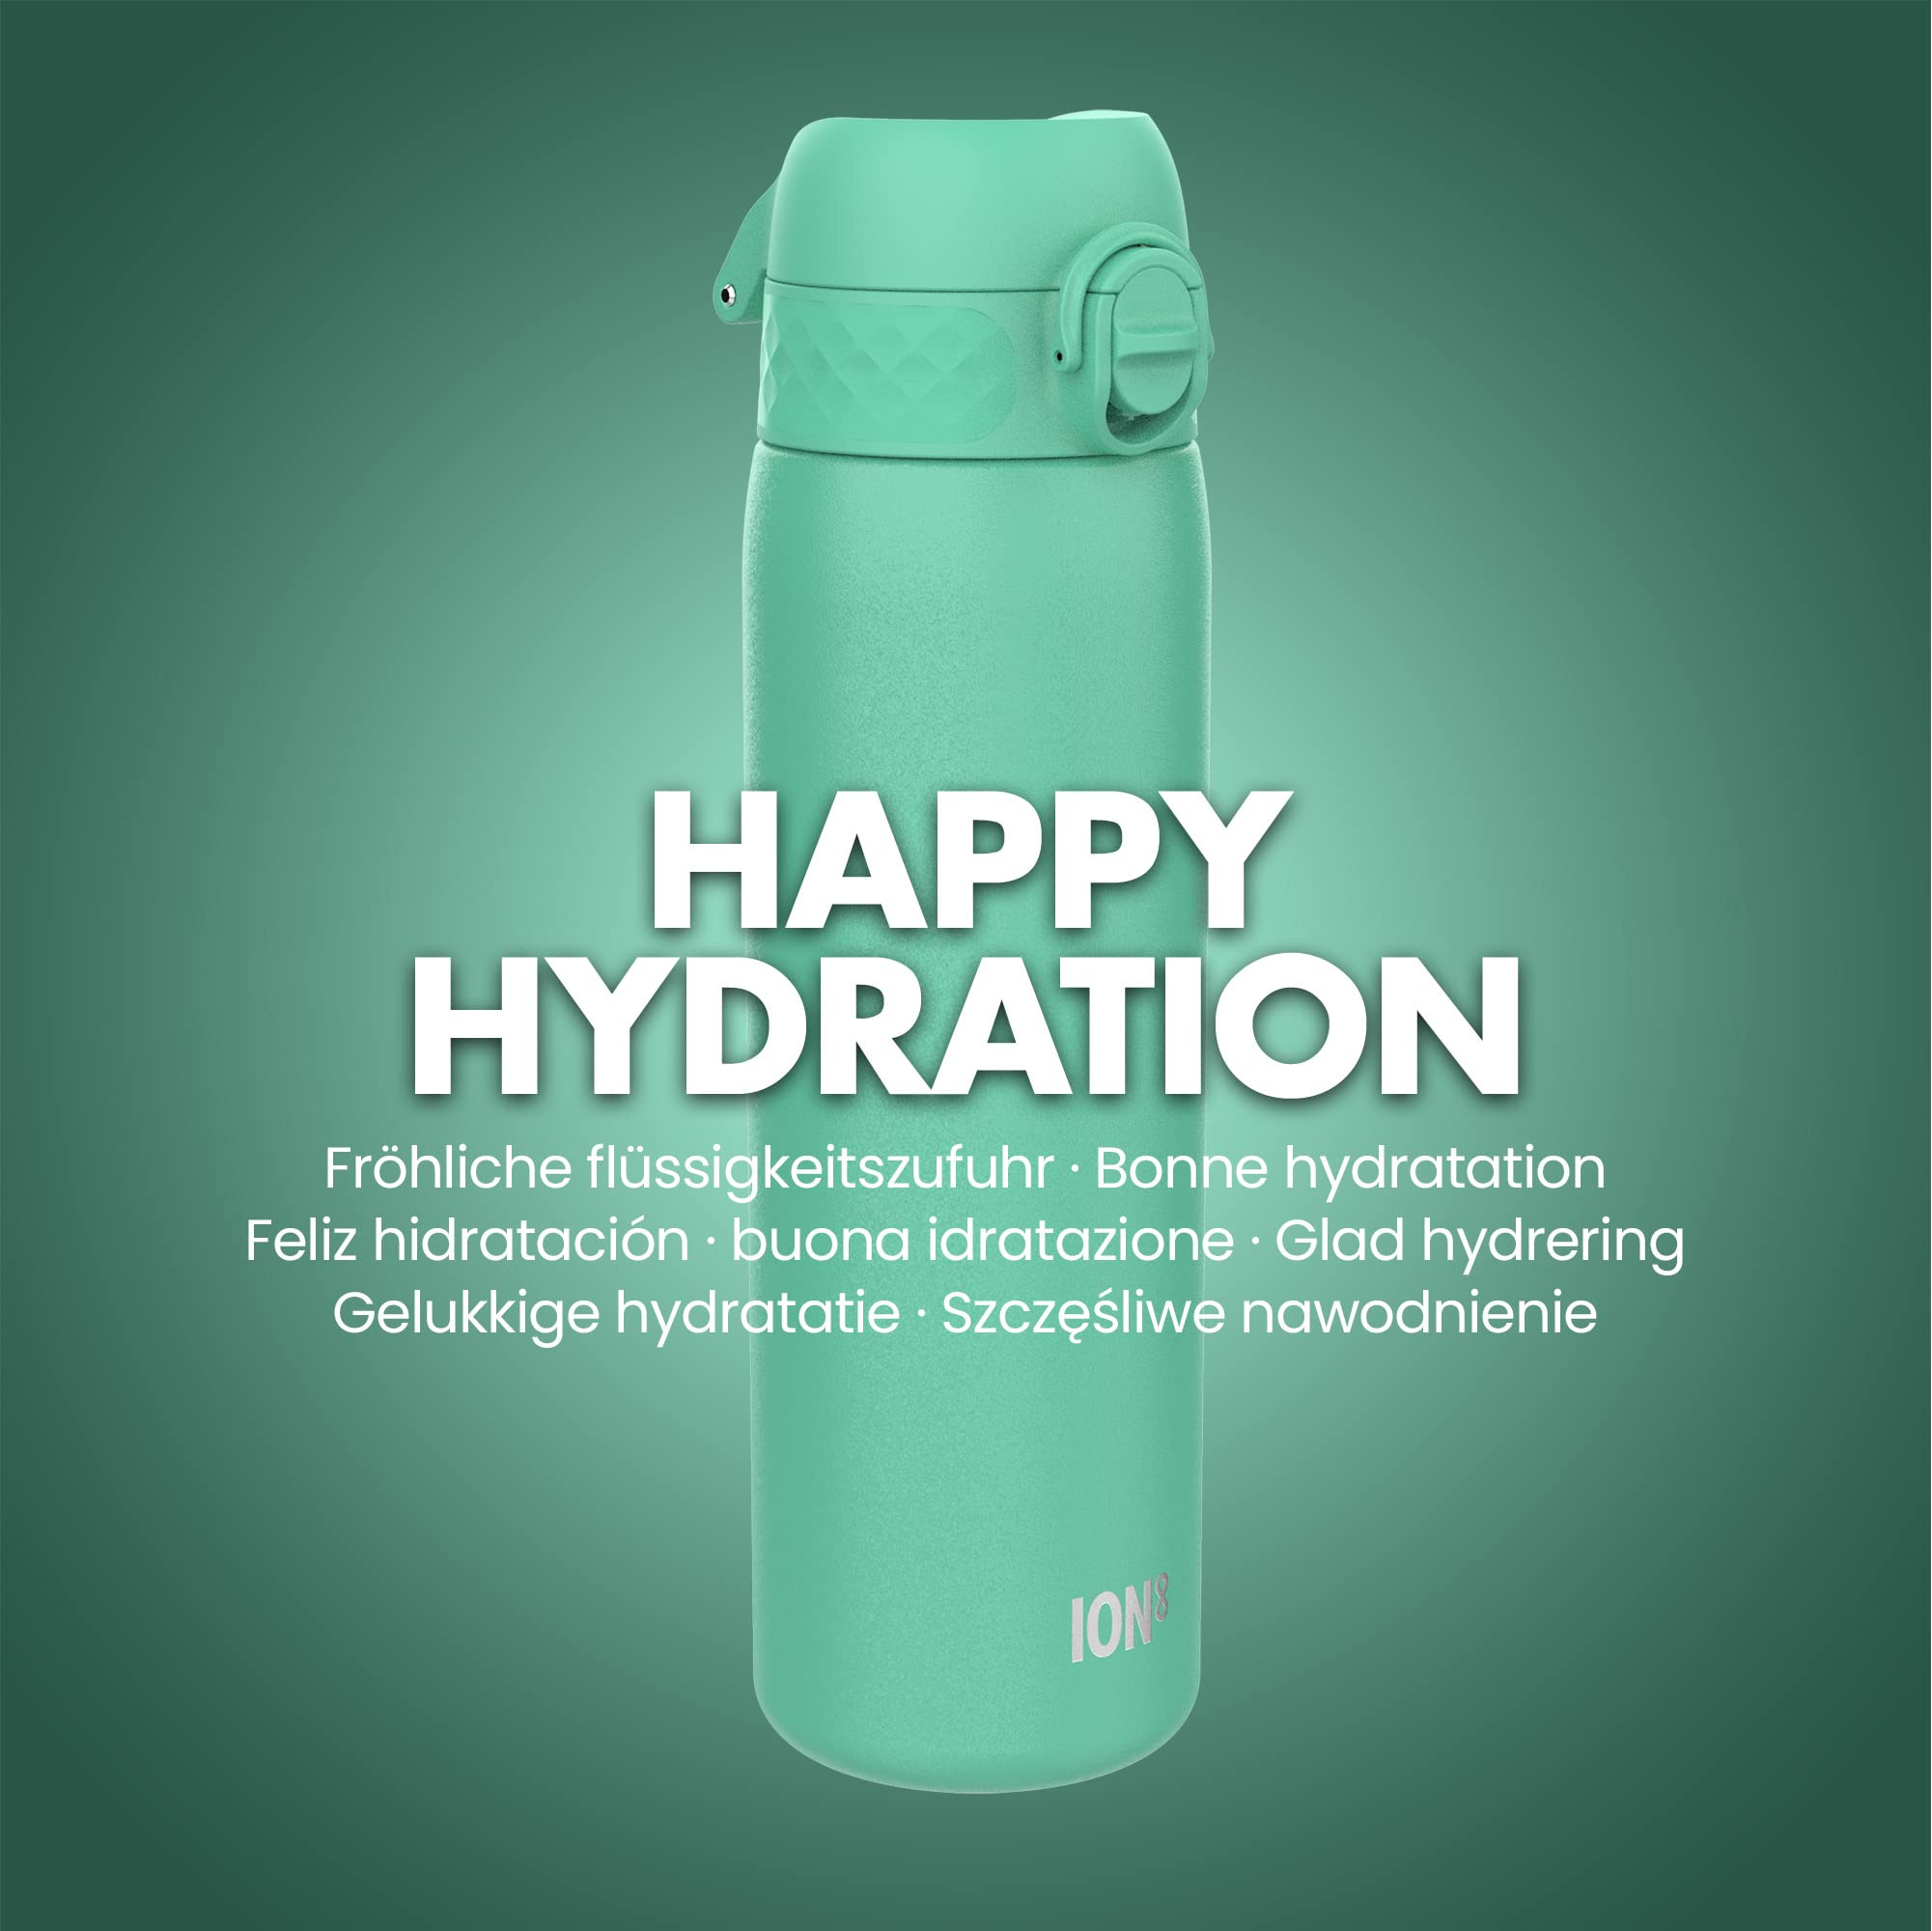 ION8 Steel Water Bottle, 600 ml/20 oz, Leak Proof, Easy to Open, Secure Lock, Dishwasher Safe, Flip Cover, Fits Cup Holders, Carry Handle, Durable, Scratch Resistant, Carbon Neutral, Teal Green